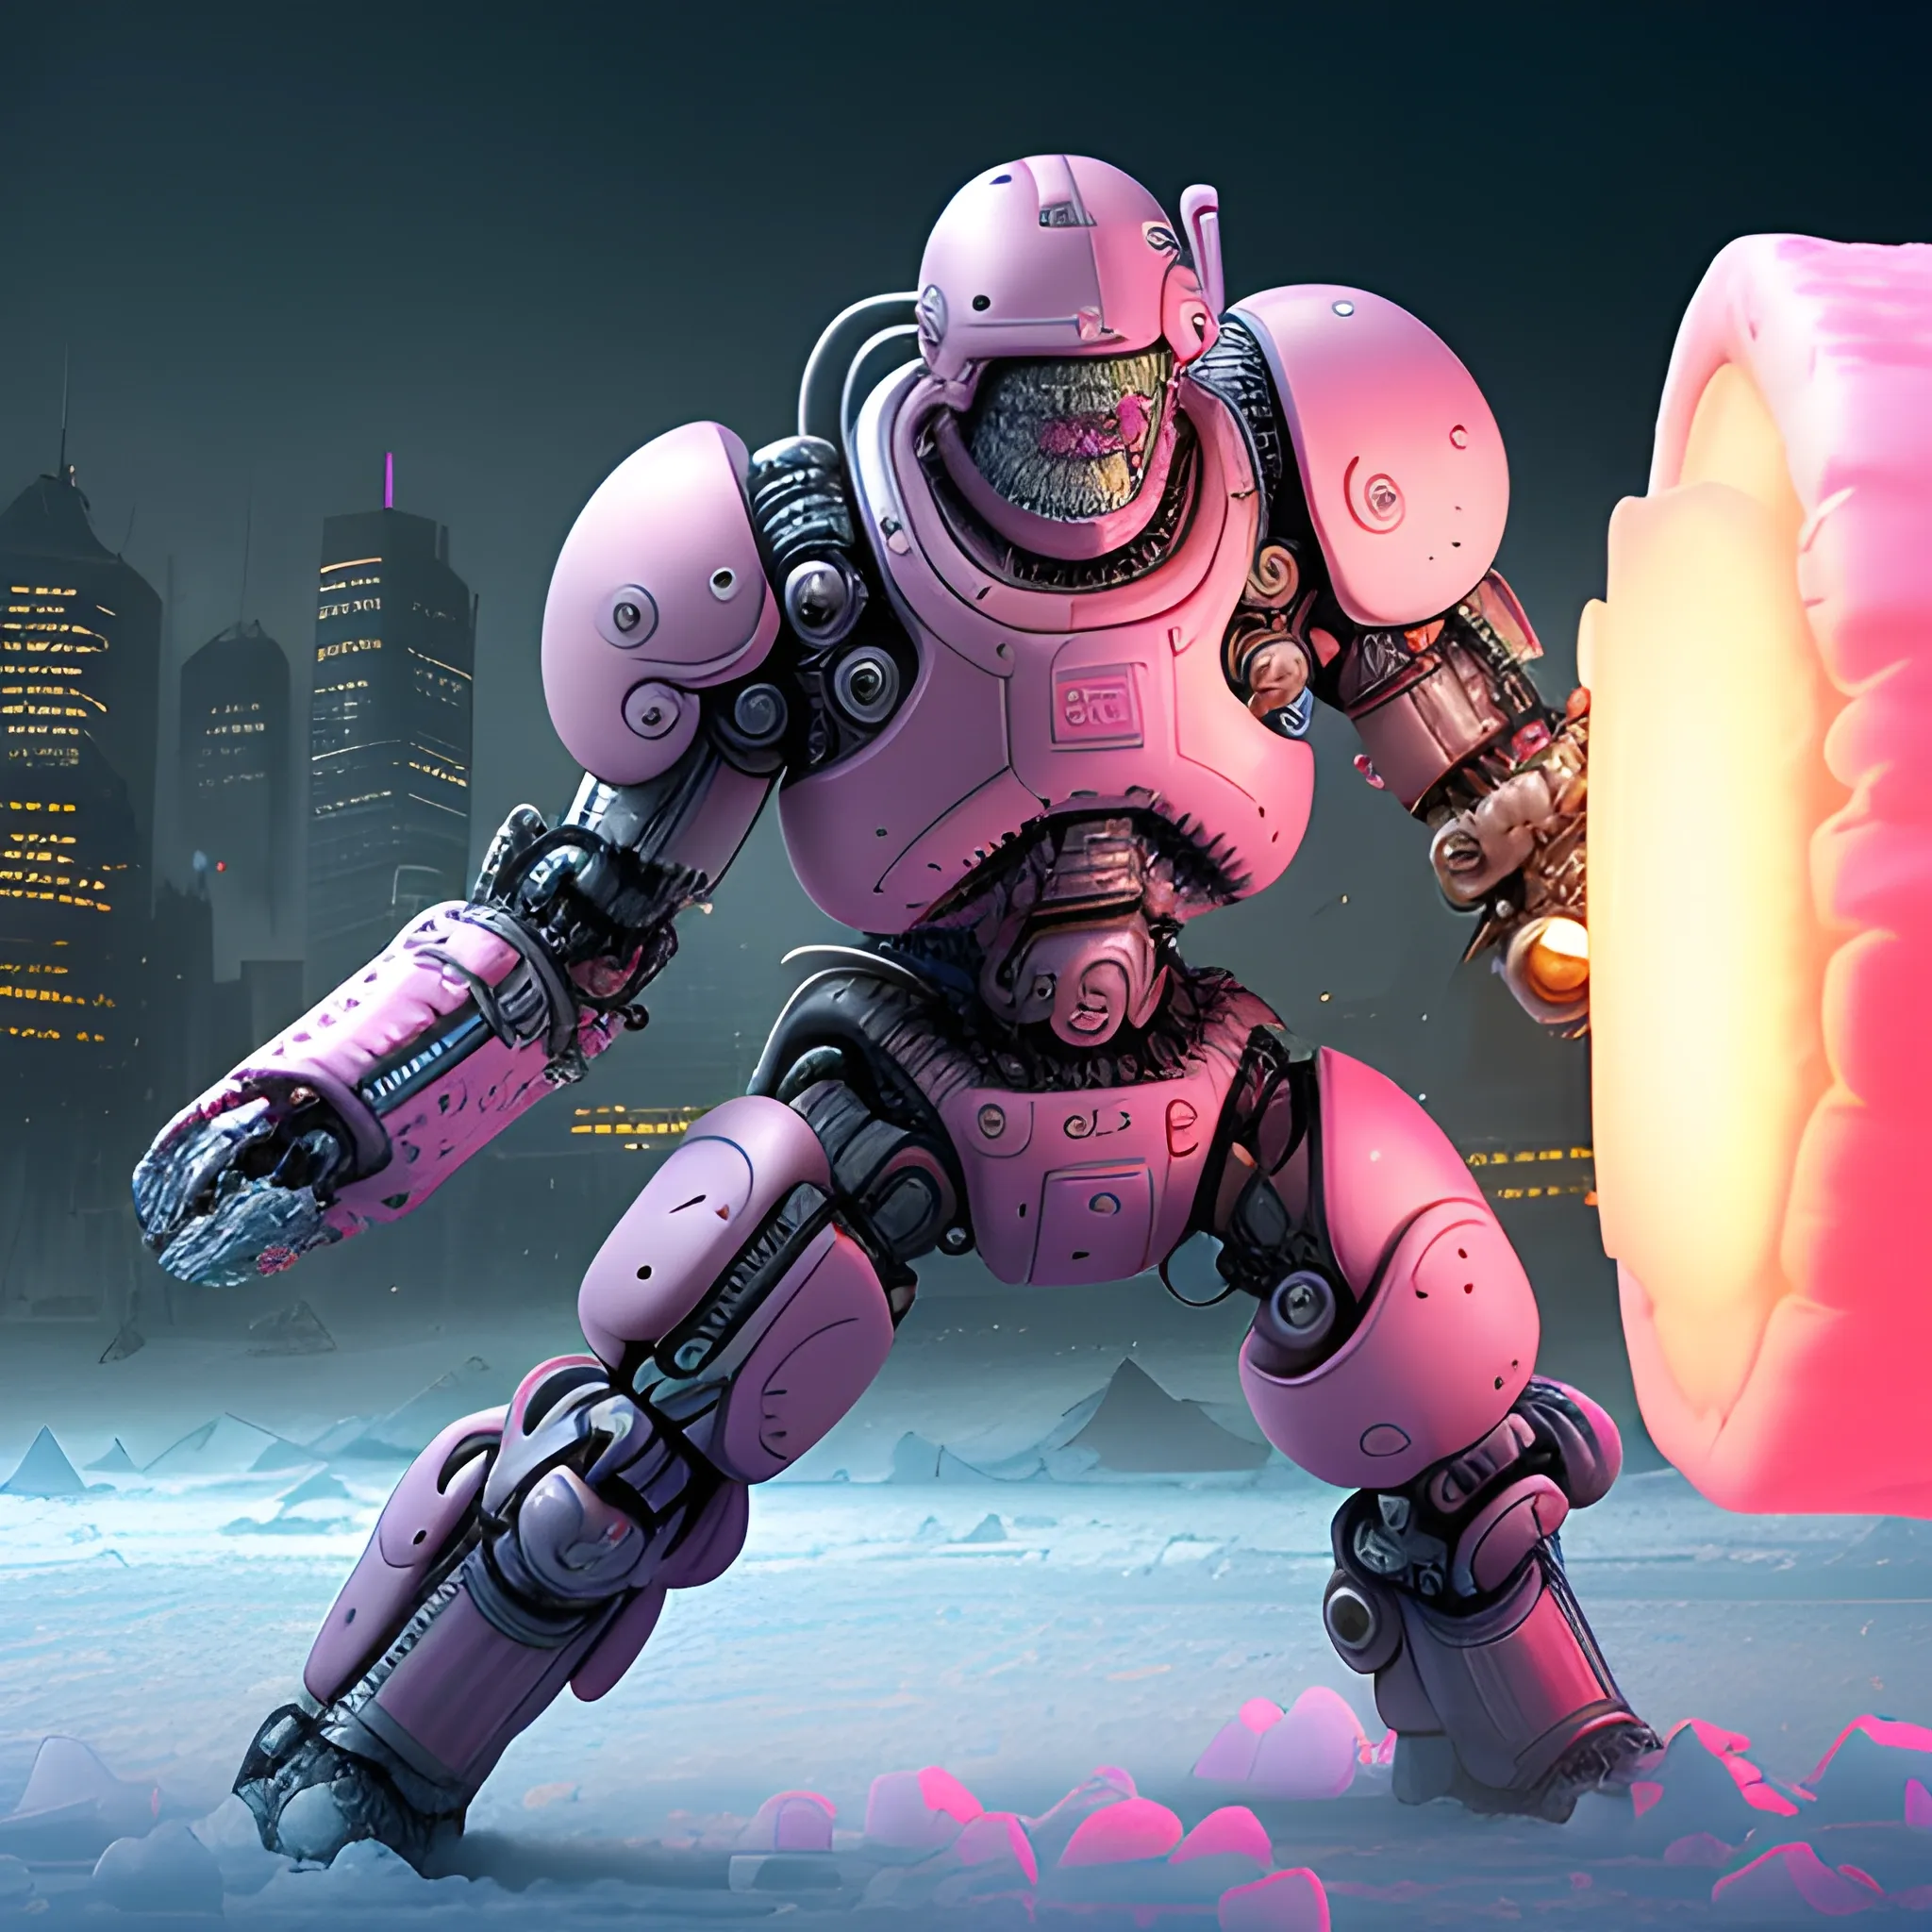 A microscopically detailed digital art in a cinematic style, this high resolution art of a aged half-machine half-male battle-cyborg which is fighting on the ice-covered city is a true masterpiece. (photorealistic), (high resolution), (dark and dimmed lighting), (colourful), (wide side angle), (pink marshmallow), (plastic waste).